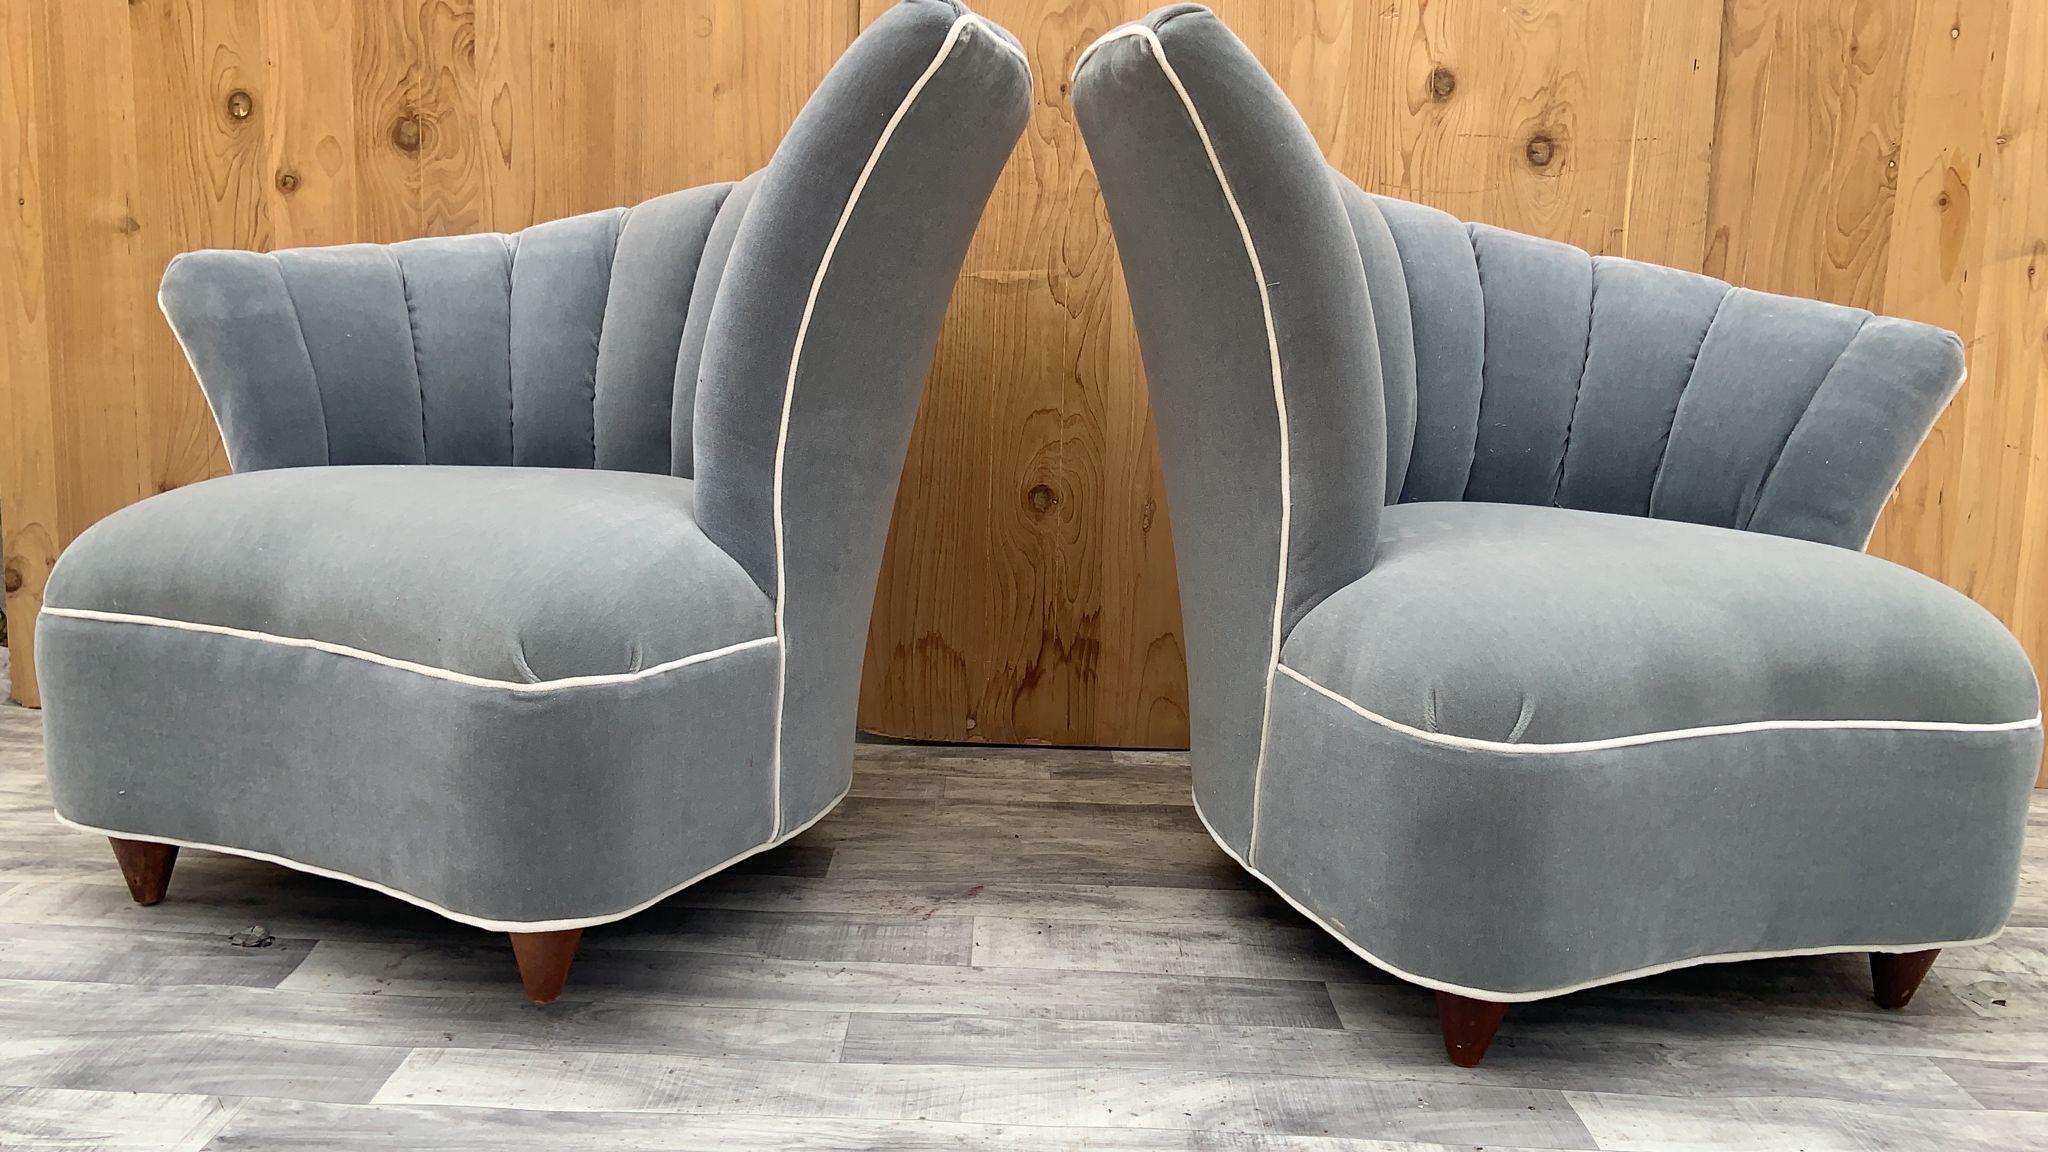 Hollywood Regency Asymmetrical Deco Channel Back Lounges Newly Upholstered in Parisian Blu & Creme Mohair - Pair

Gorgeous Hollywood Regency Pair of Asymmetrical Deco Channel-Back Lounges. The Lounges have been Completely Custom Upholstered in a